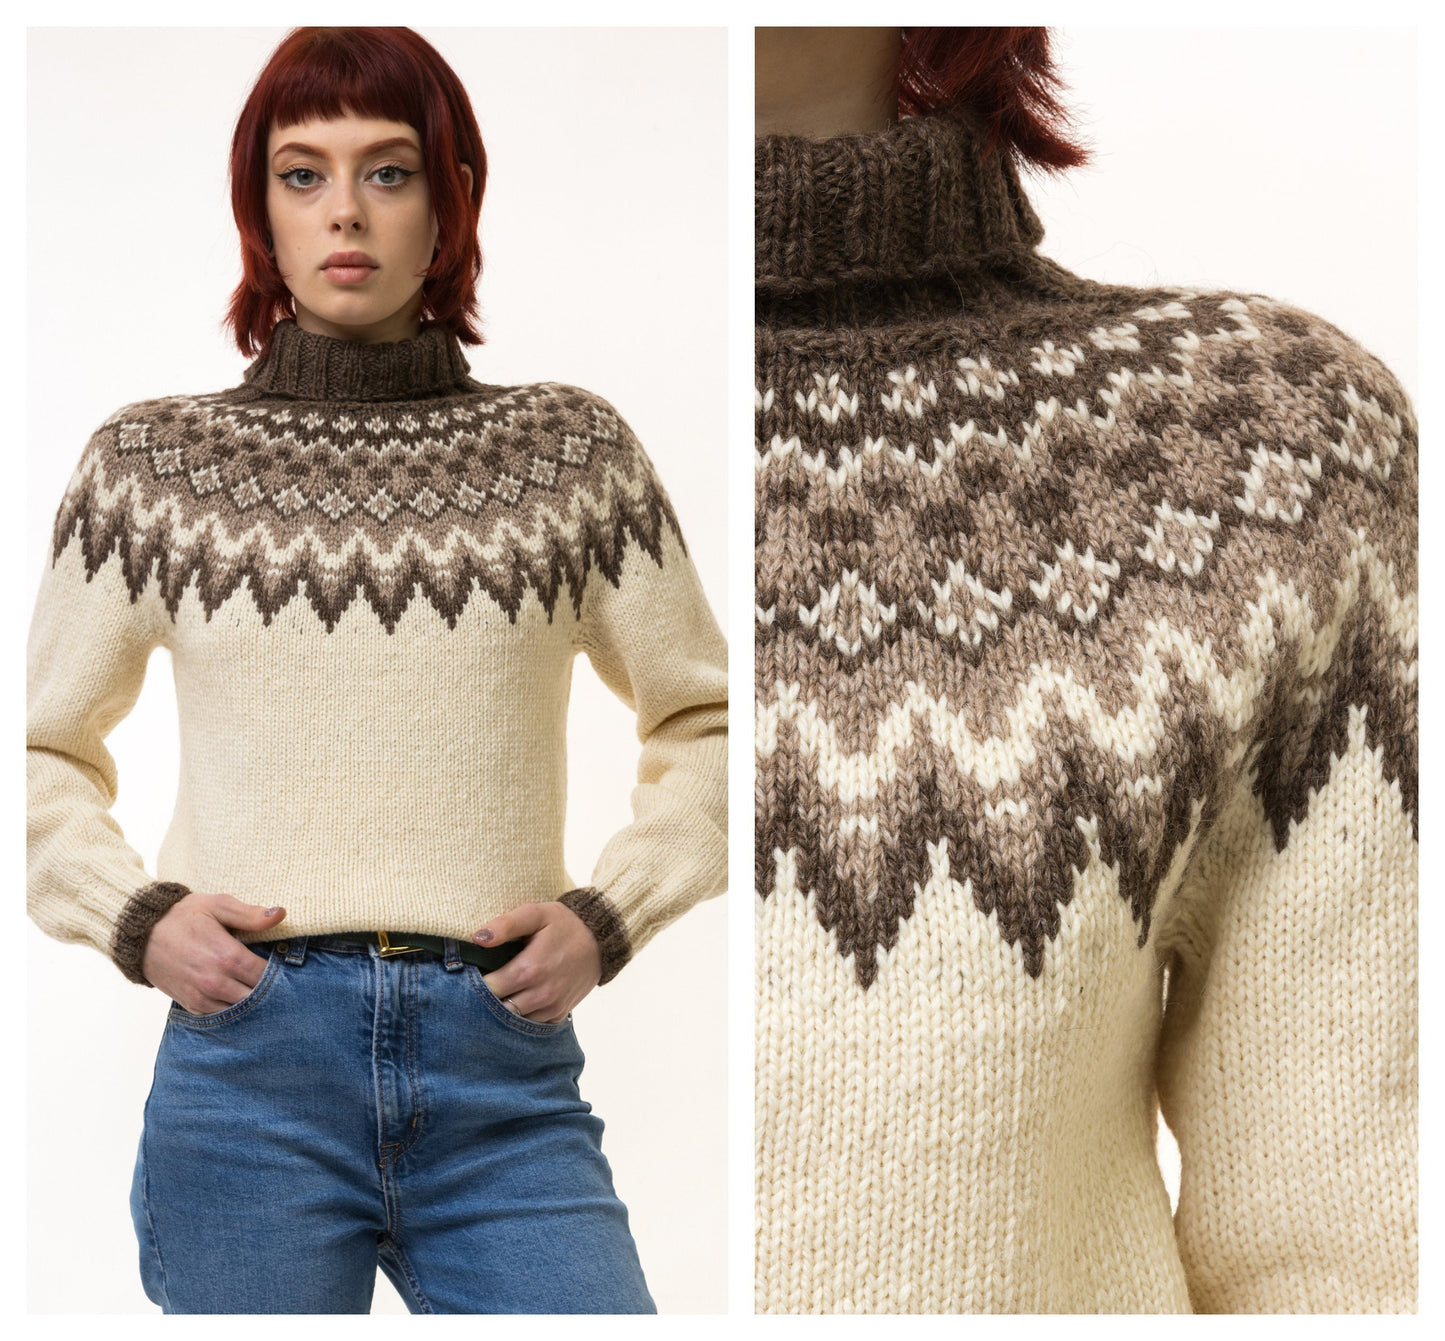 70s Vintage Iceland Norway Knitwear Handknitted Crew Neck Beige Brown Ornament Wool Jumper Sweater size Small